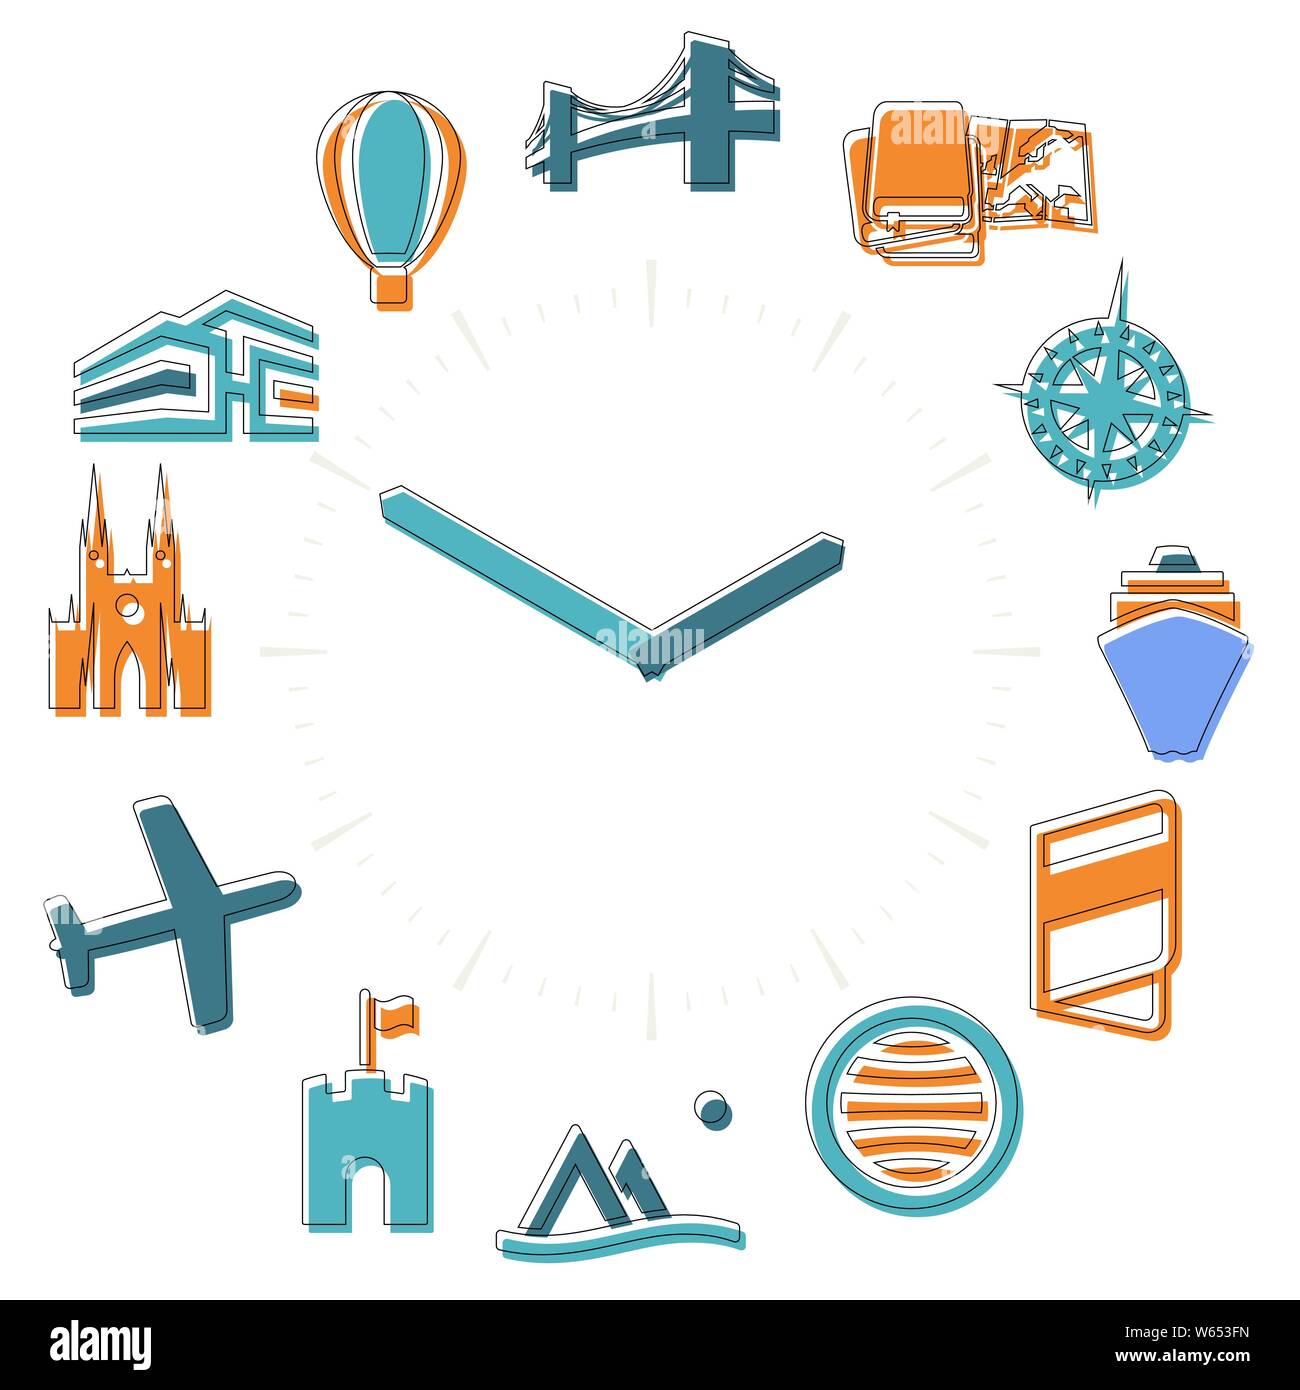 Vector illustration. Travel time. Activities icons in a watch sphere with hours. Stock Vector